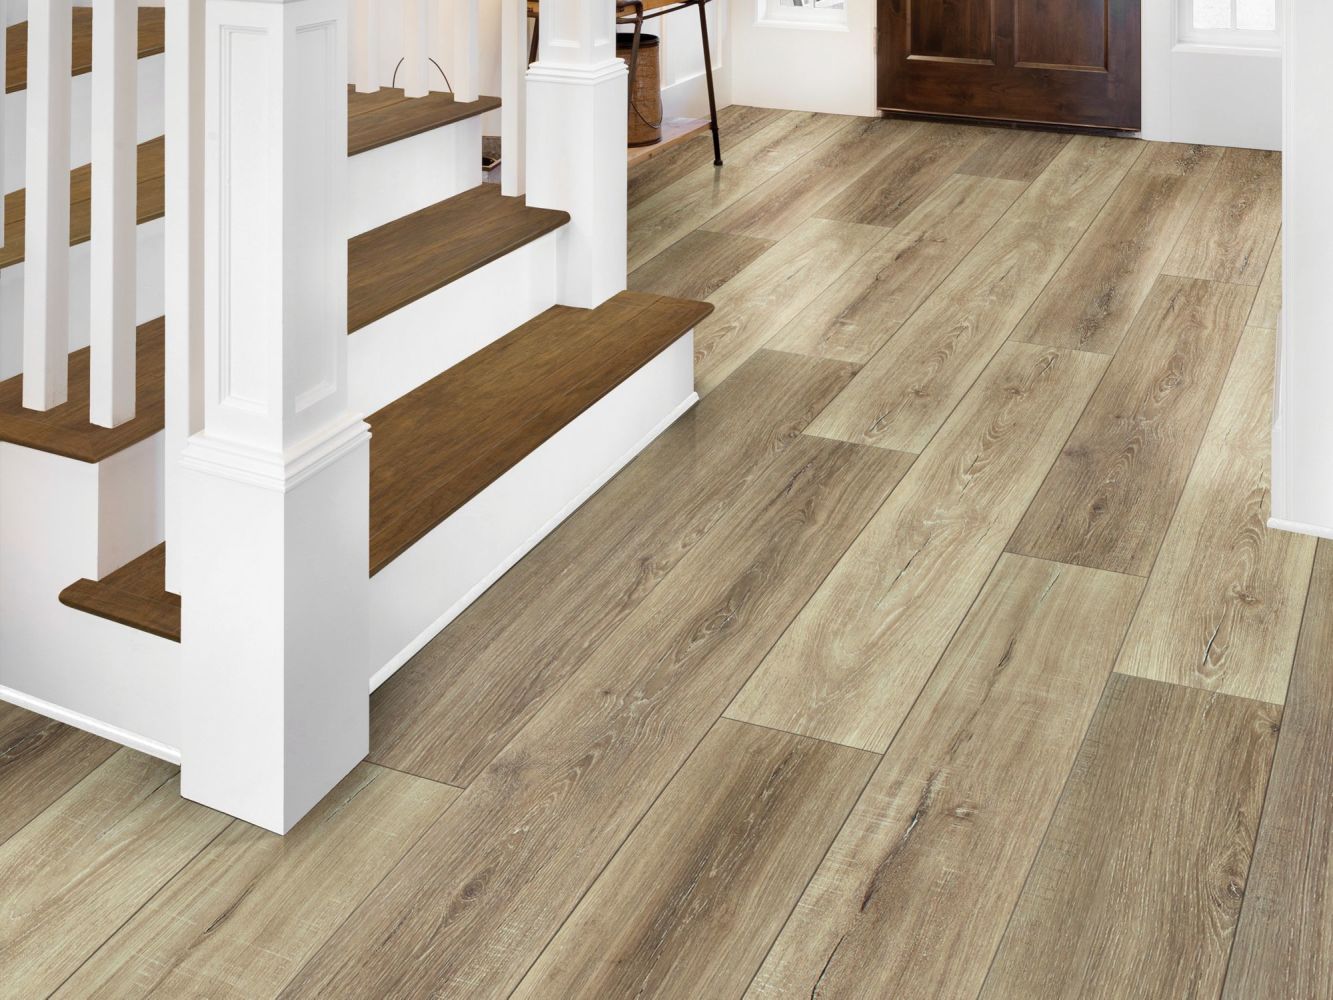 Shaw Floors Resilient Property Solutions Bonafide Hd+accent Sable 07083_VE427